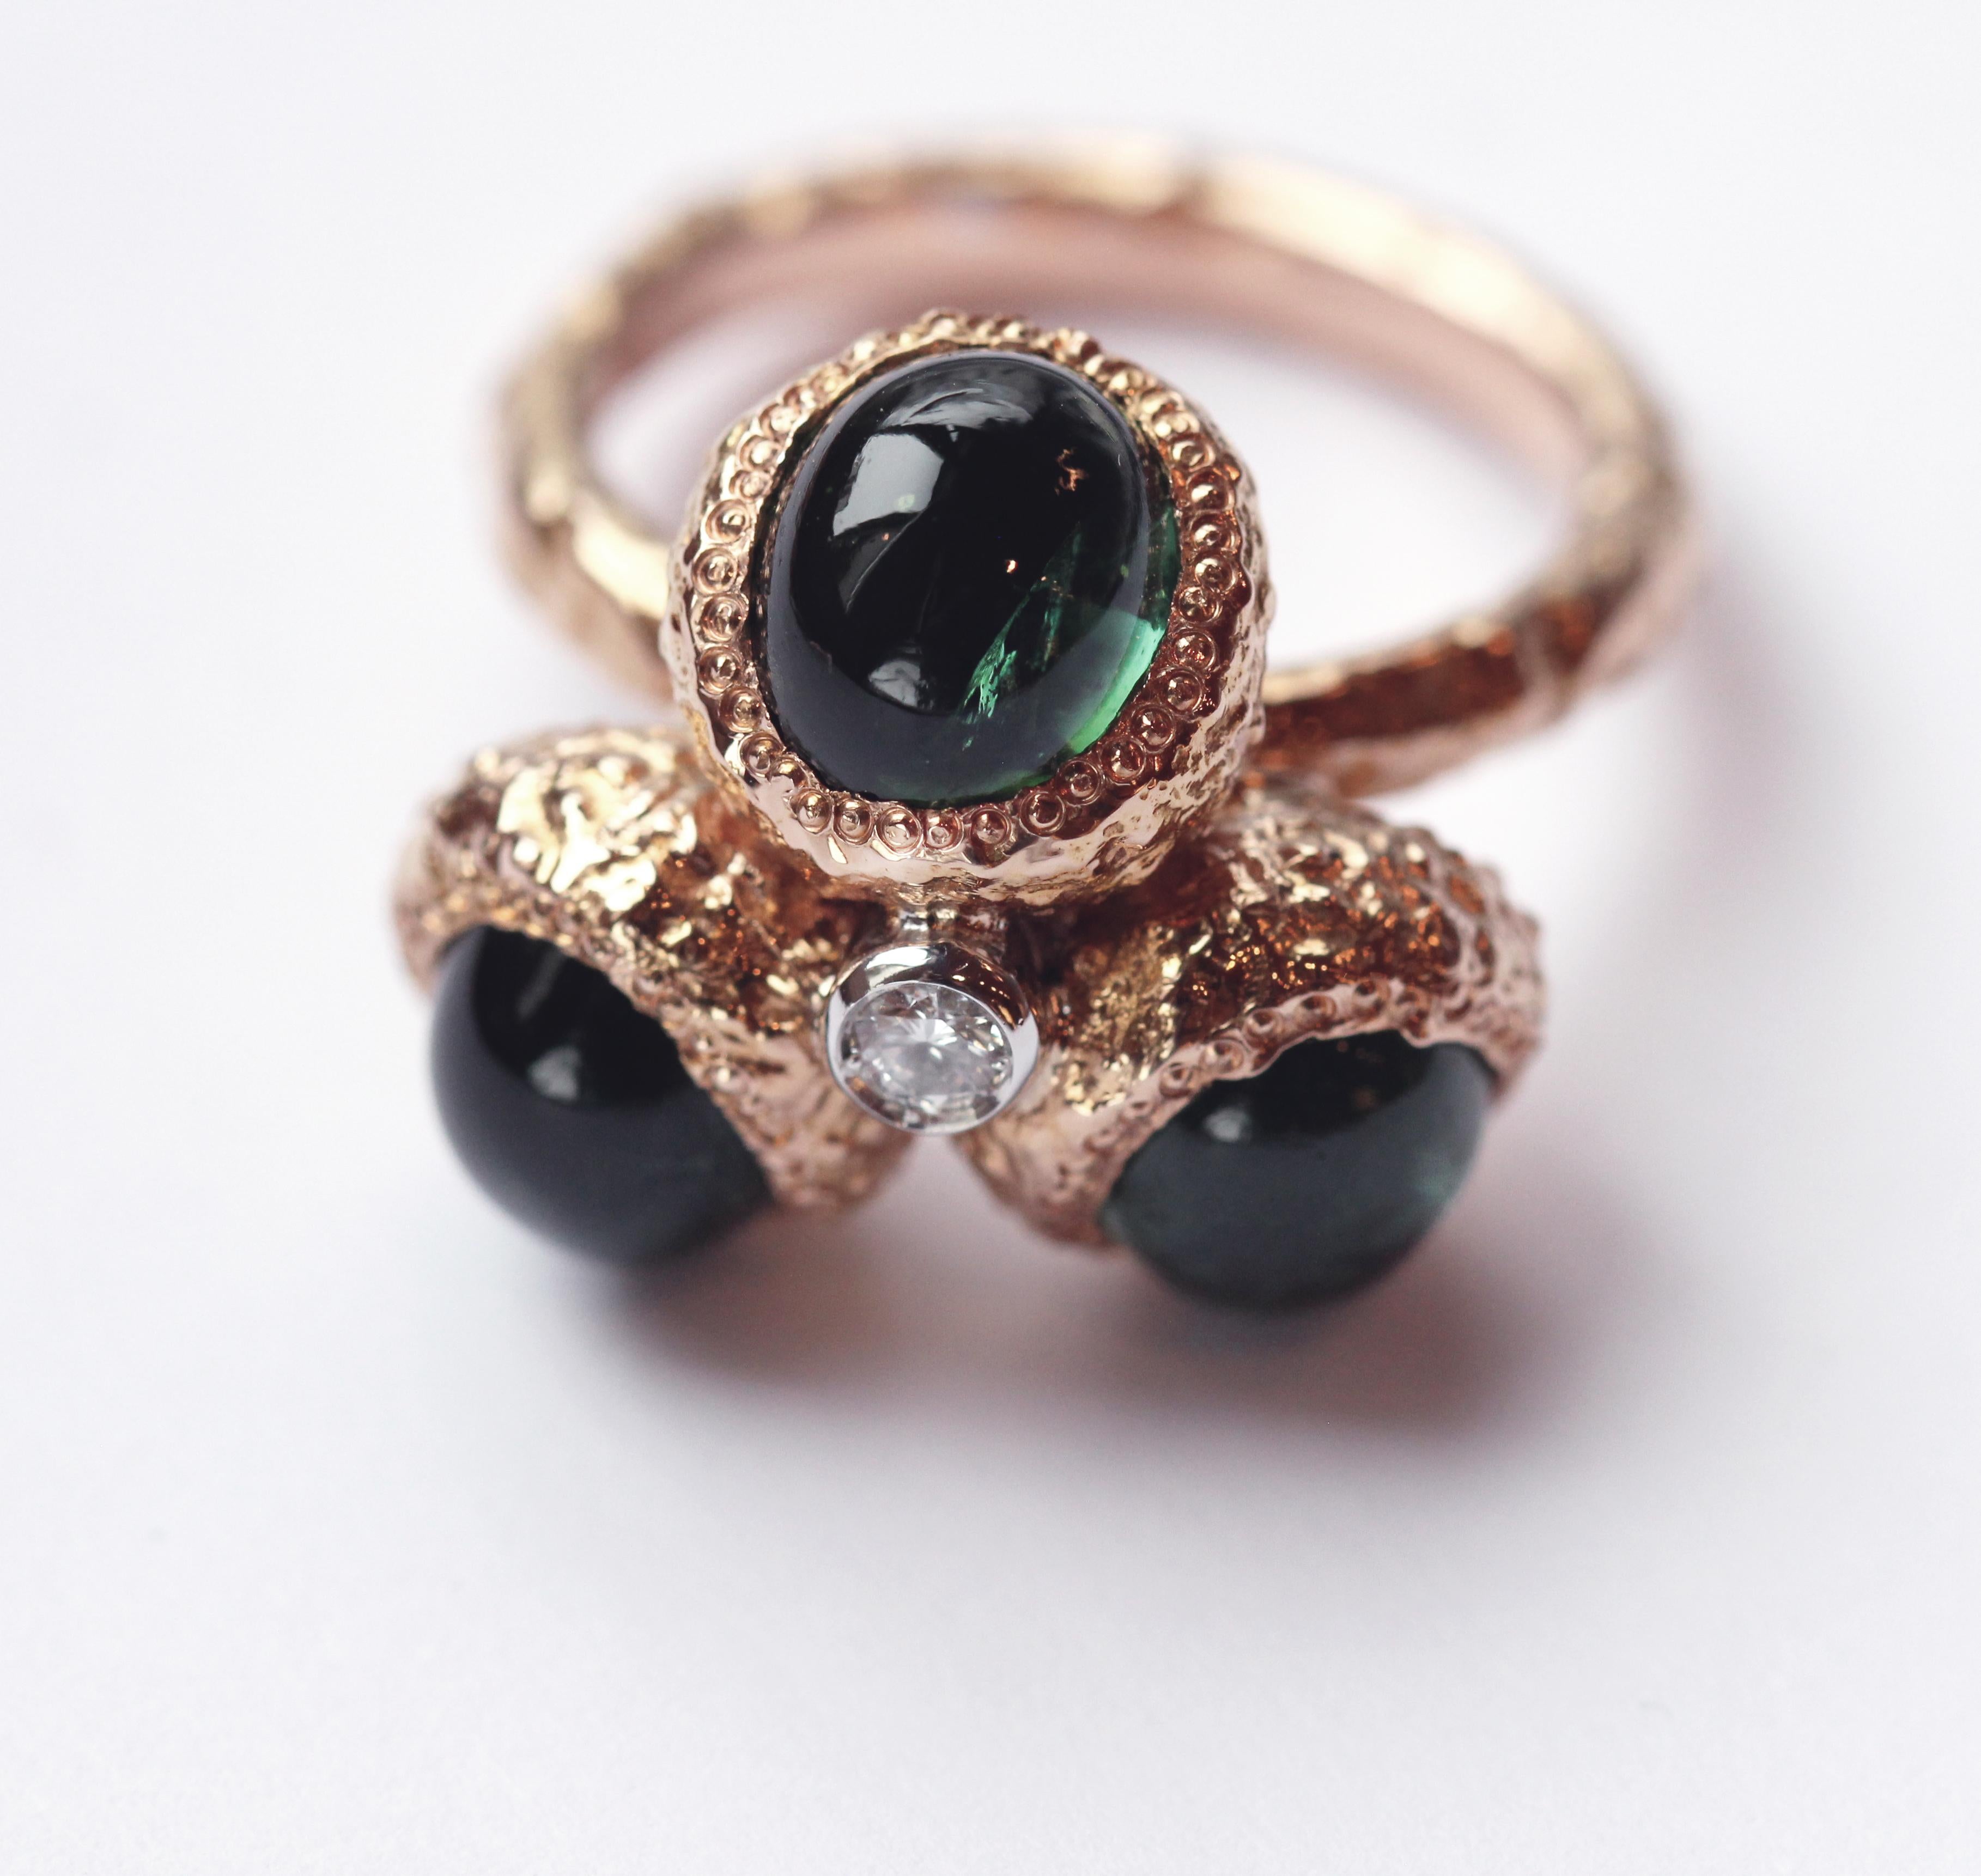 Three Stone green Tourmaline Cabochon Ring; design inspired to the Iconic Federica Rettore sea urchin texture theeme  a characteristic of her collection. the style is in 18 Karat Rose Gold gr. 15,05;  Diamond Carat 0,07; Cabochon Tourmaline Carat